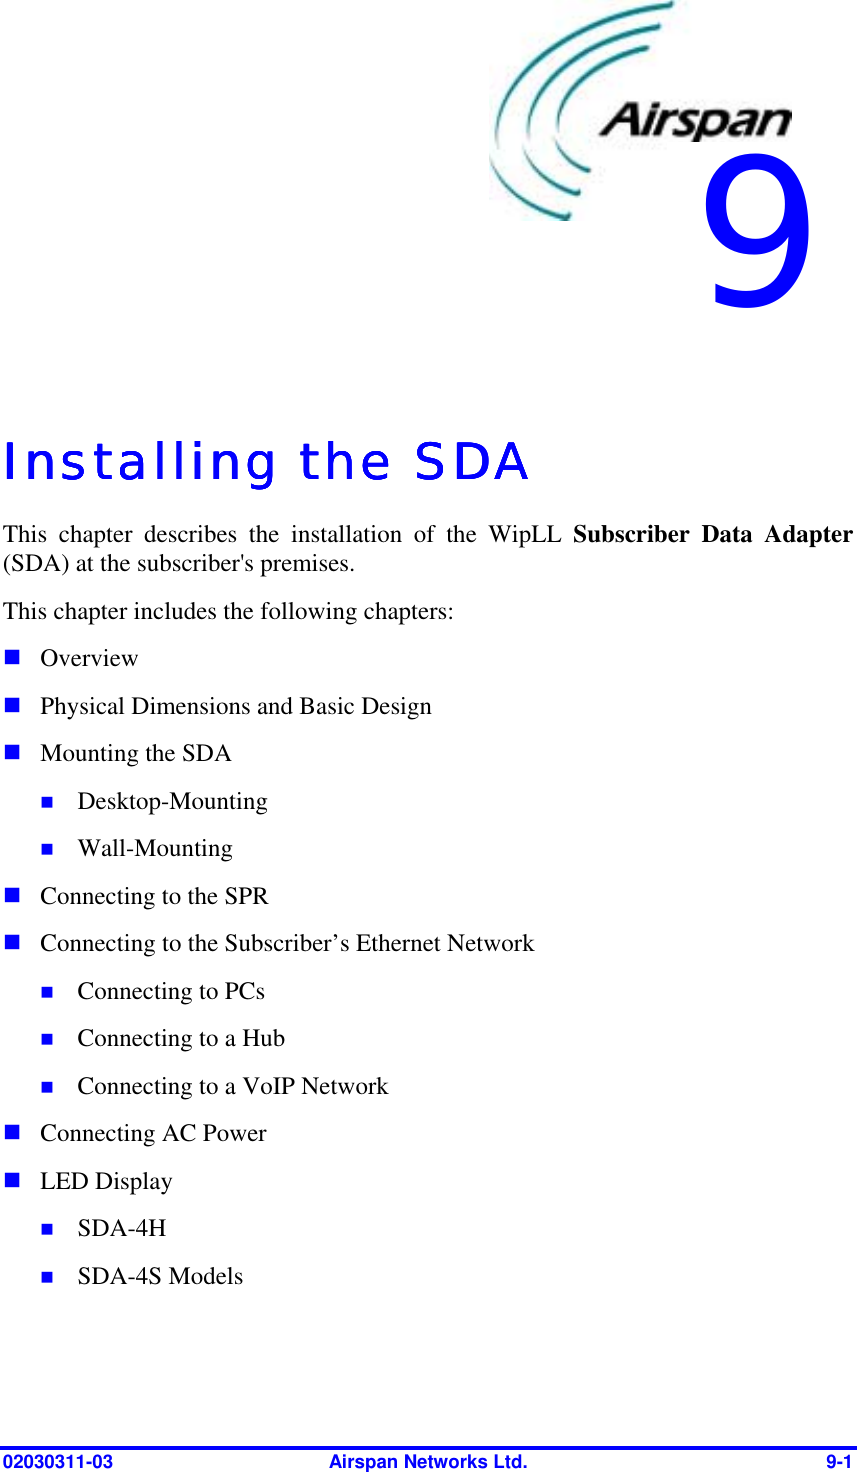  02030311-03  Airspan Networks Ltd.  9-1   Installing the SDAInstalling the SDAInstalling the SDAInstalling the SDA    This chapter describes the installation of the WipLL Subscriber Data Adapter (SDA) at the subscriber&apos;s premises.  This chapter includes the following chapters: ! Overview ! Physical Dimensions and Basic Design ! Mounting the SDA !  Desktop-Mounting !  Wall-Mounting ! Connecting to the SPR ! Connecting to the Subscriber’s Ethernet Network !  Connecting to PCs !  Connecting to a Hub !  Connecting to a VoIP Network ! Connecting AC Power ! LED Display !  SDA-4H !  SDA-4S Models 9 